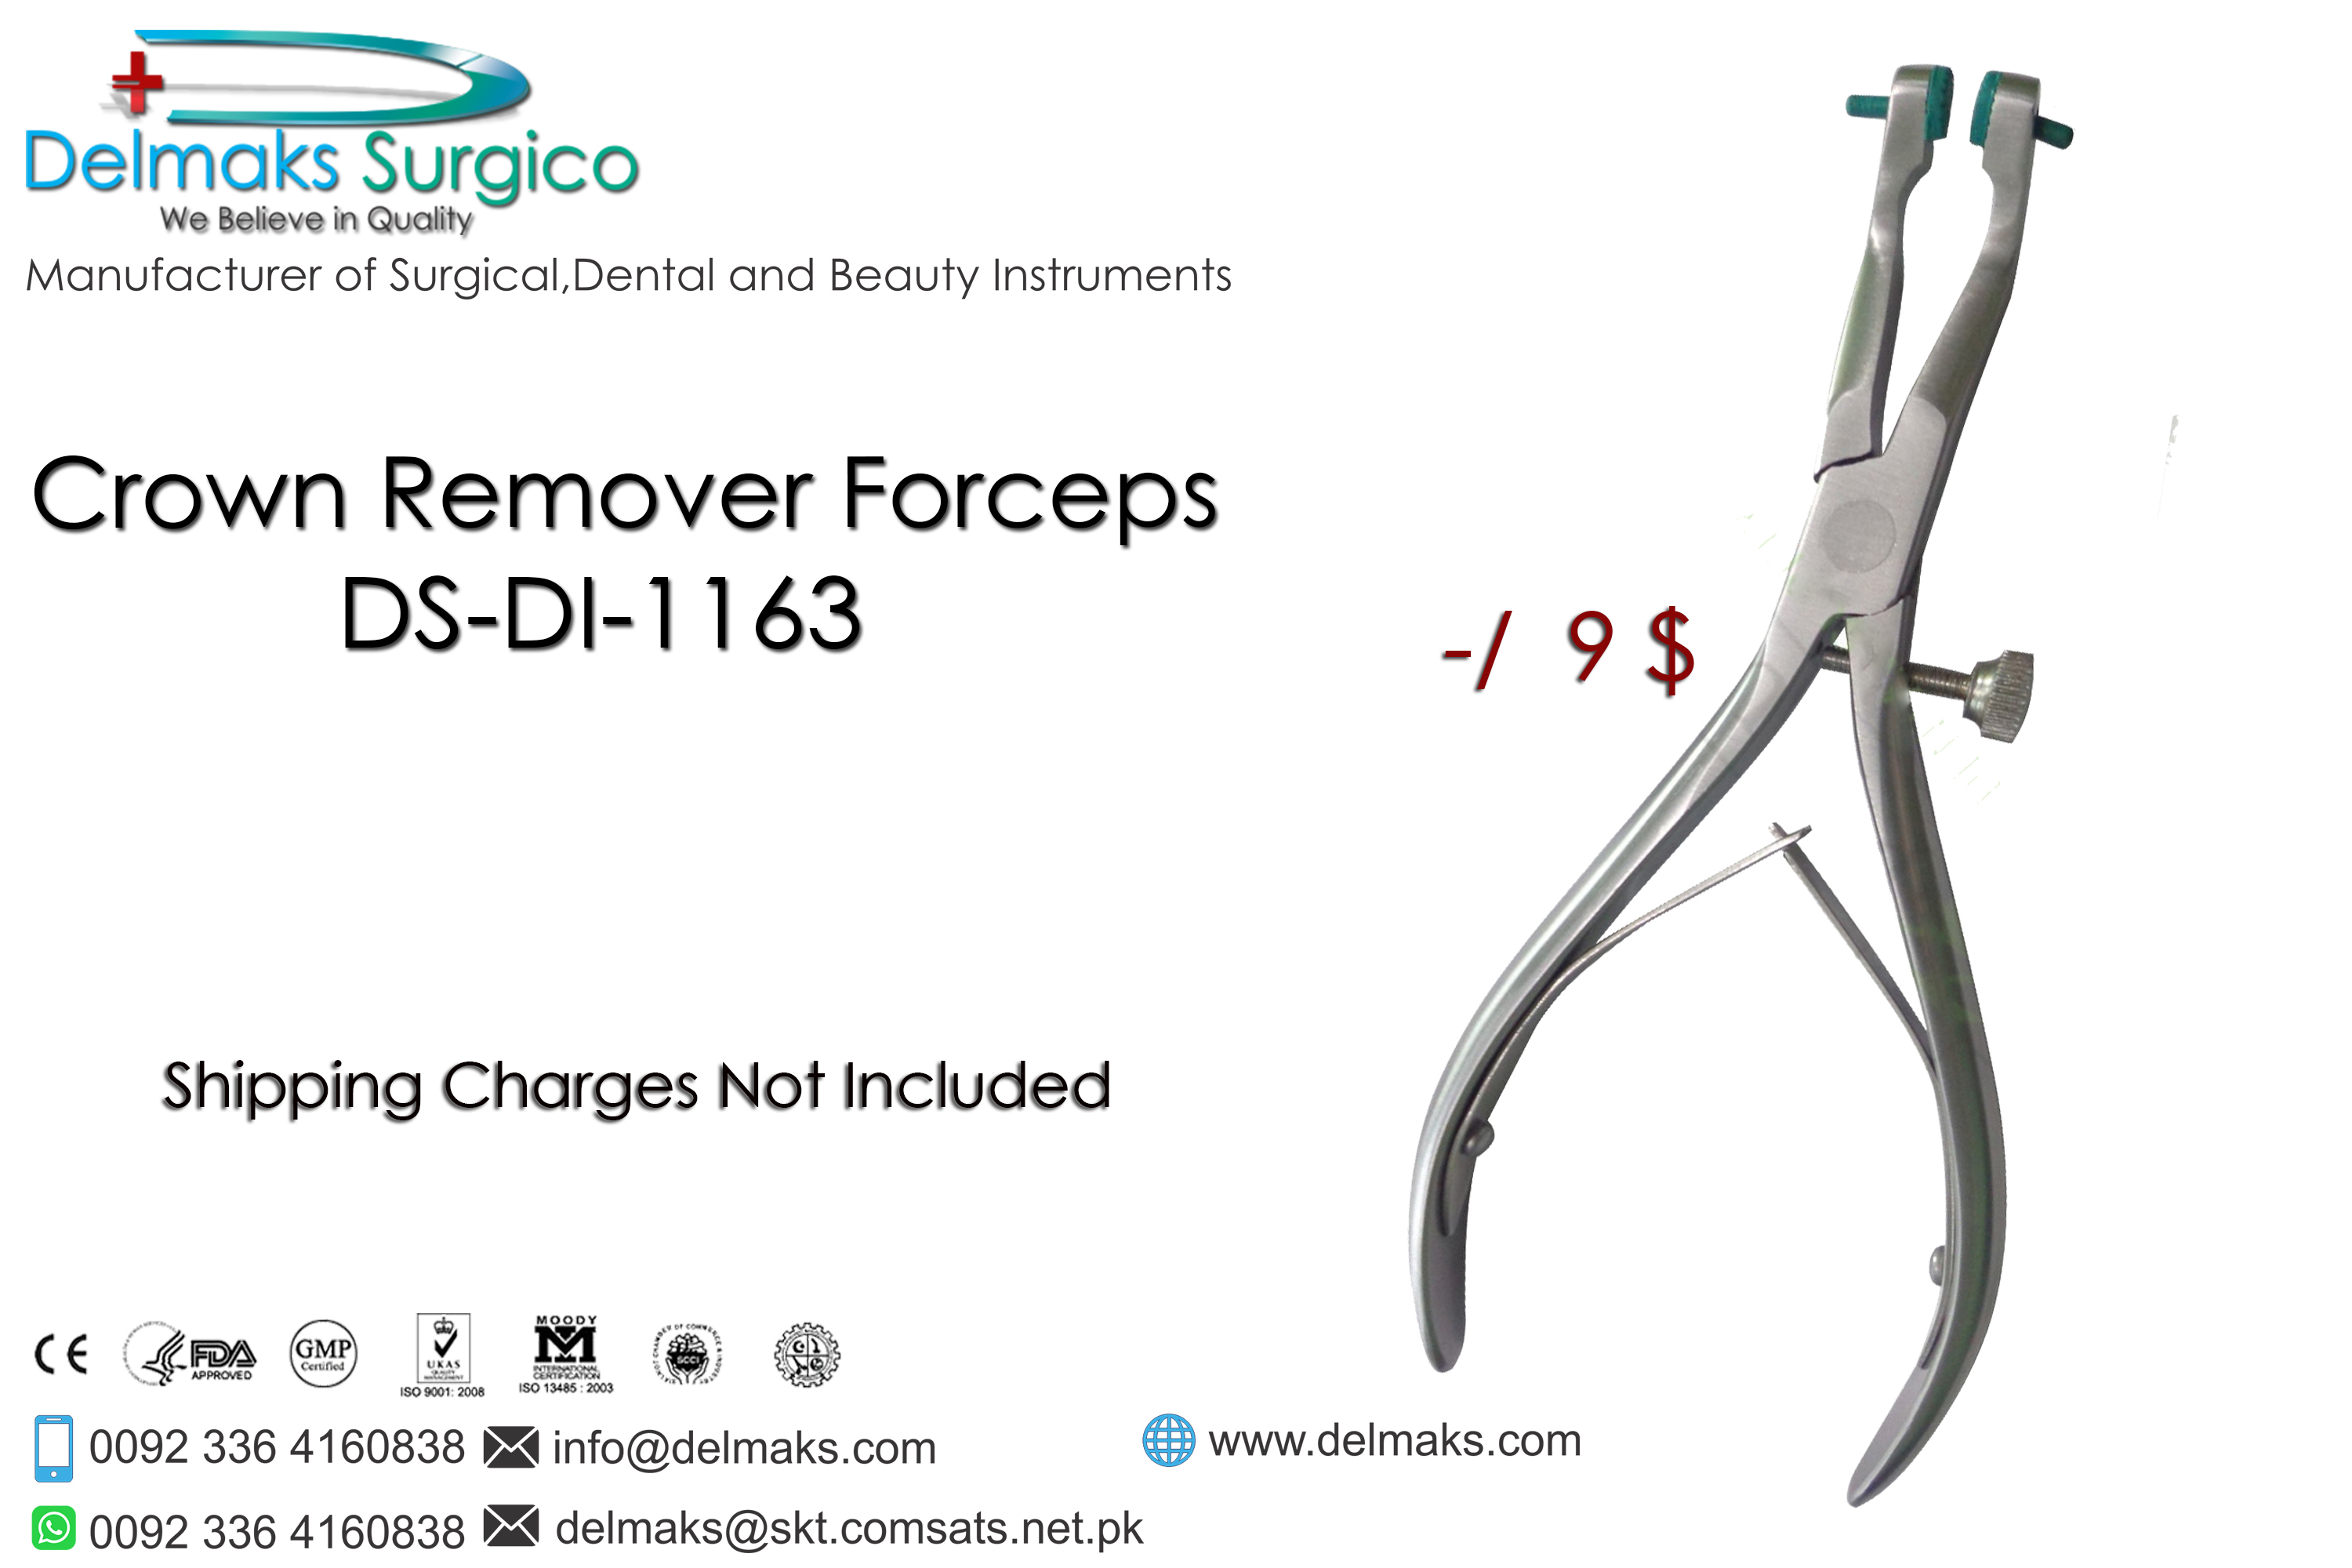 Crown Remover Forceps-Crown Instruments-Orthodontics-Orthodontic Pliers-Instruments-Dental Instruments-Extracting Forceps-Delmaks Surgico-Dental Implants-Surgical Instruments-Needle Holders-Implantolo